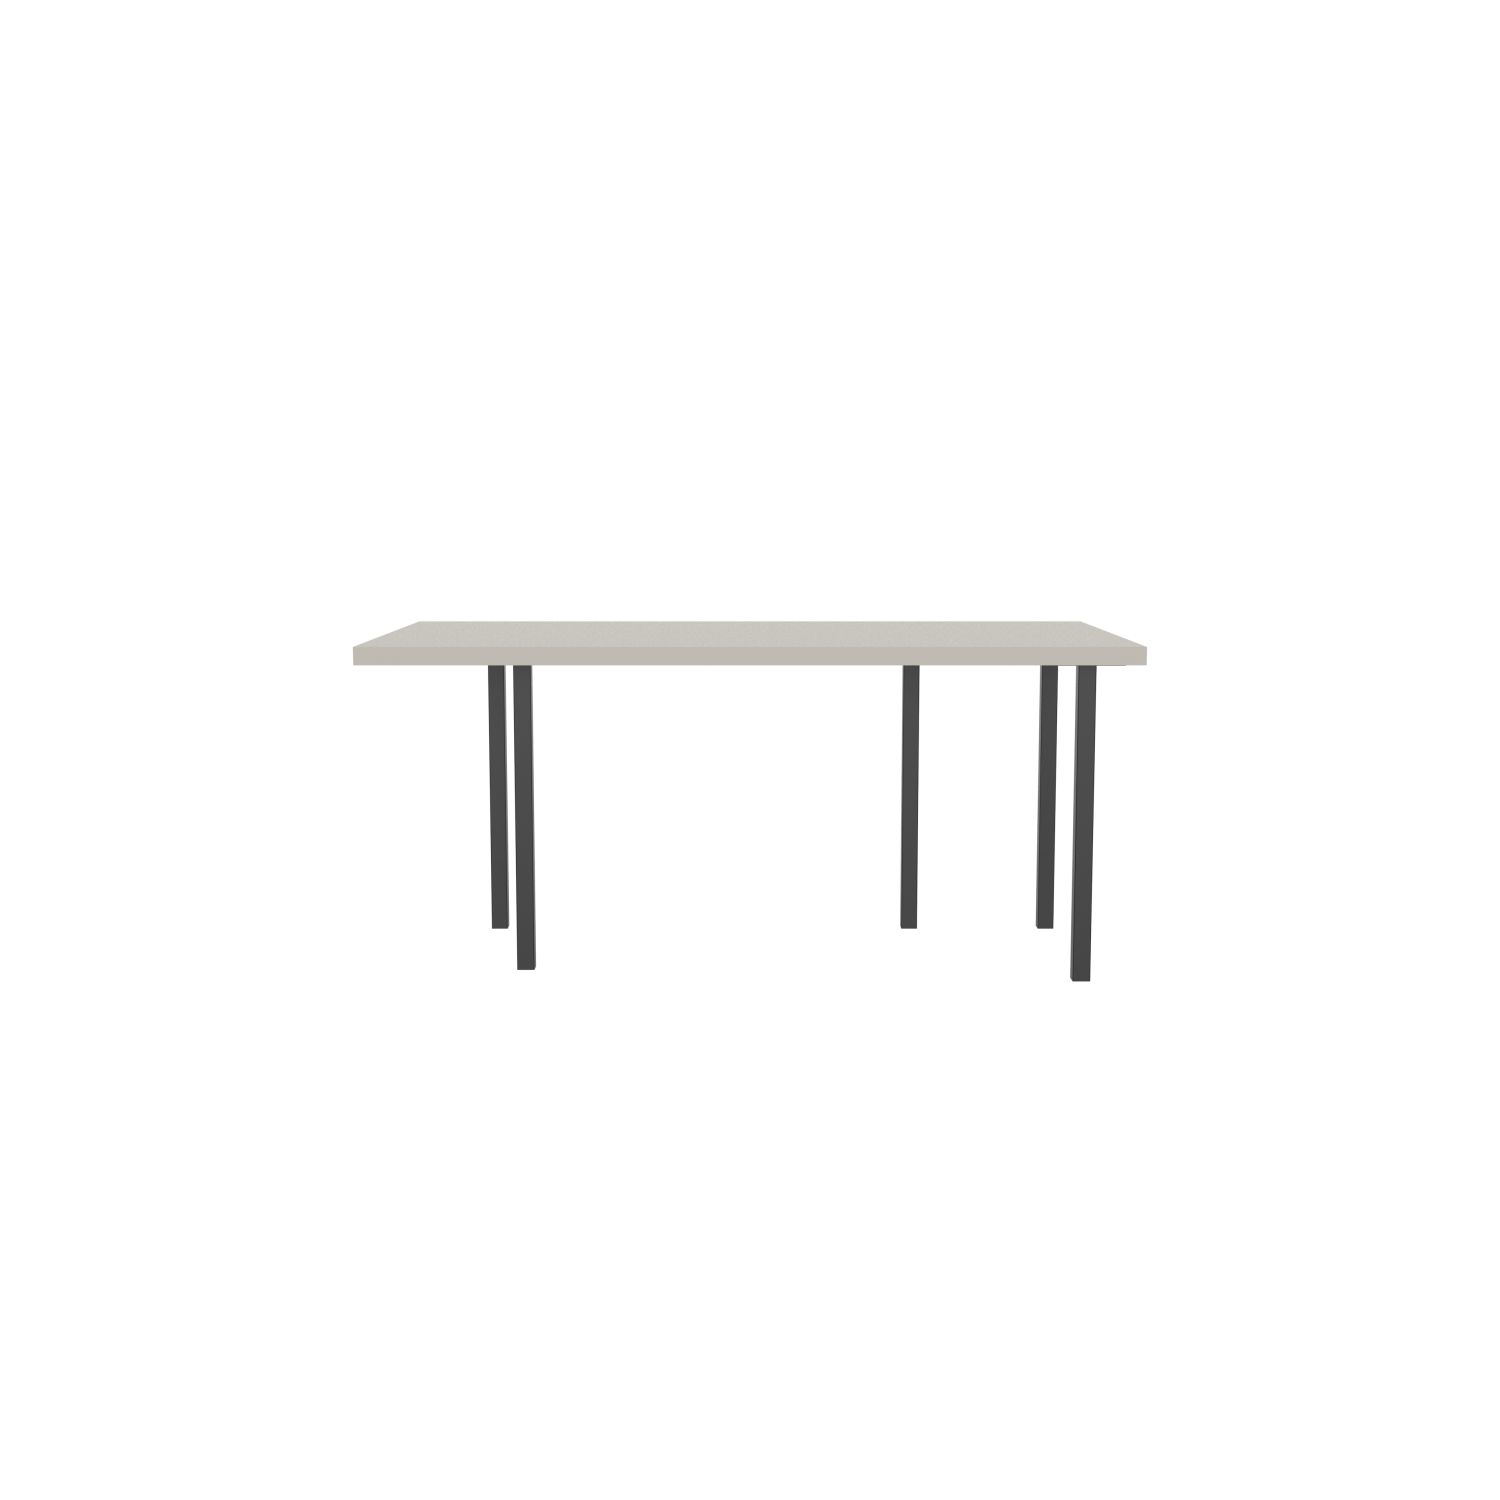 lensvelt bbrand table five fixed heigt 915x172 hpl white 50 mm price level 1 black ral9005